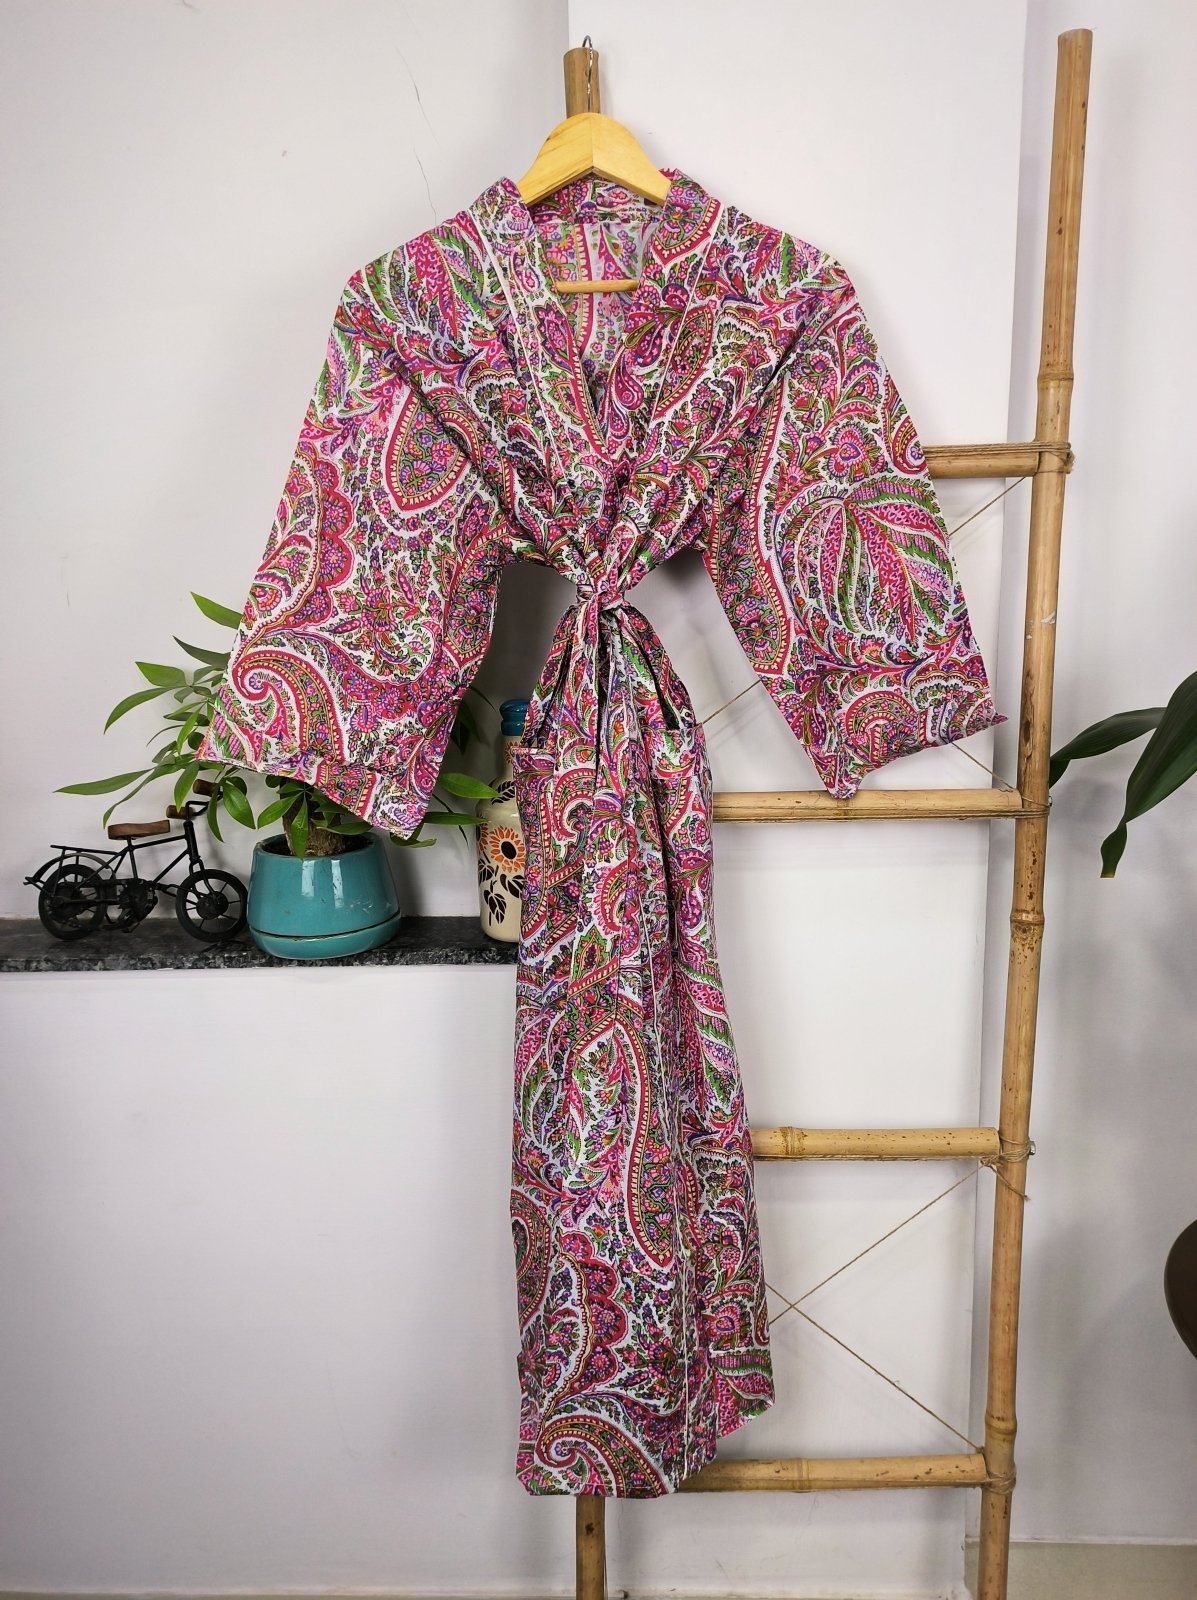 Pure Cotton Kimono Indian Handprinted Boho House Robe Summer Dress | White Pink Paisley Persian Luxury Cover Up, Maternity Mom Bridal - The Eastern Loom